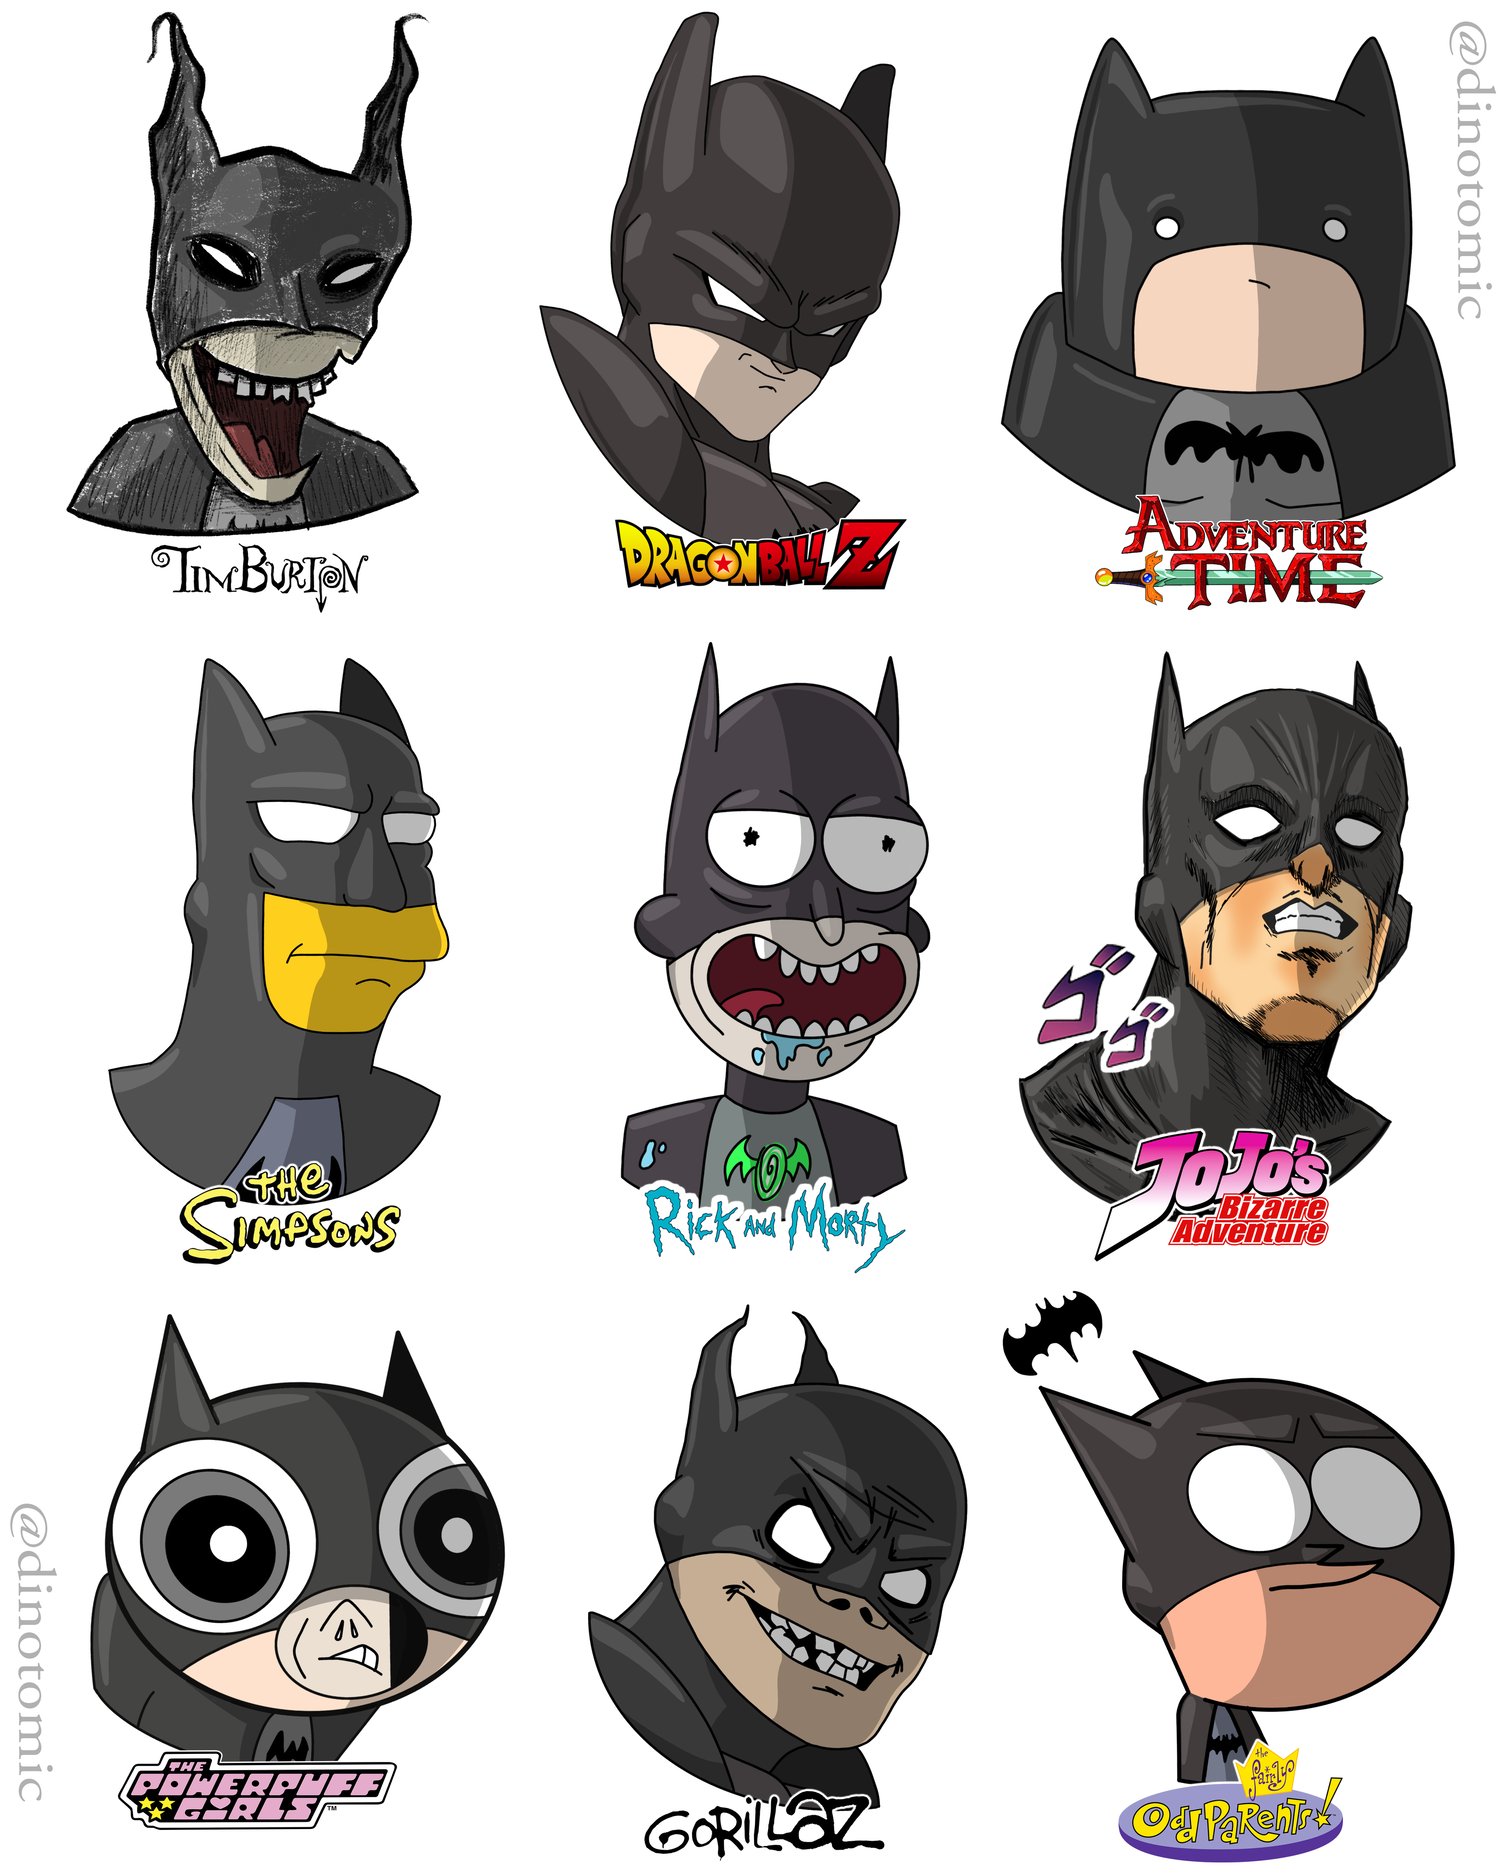 Image of #197 Batman in different styles 